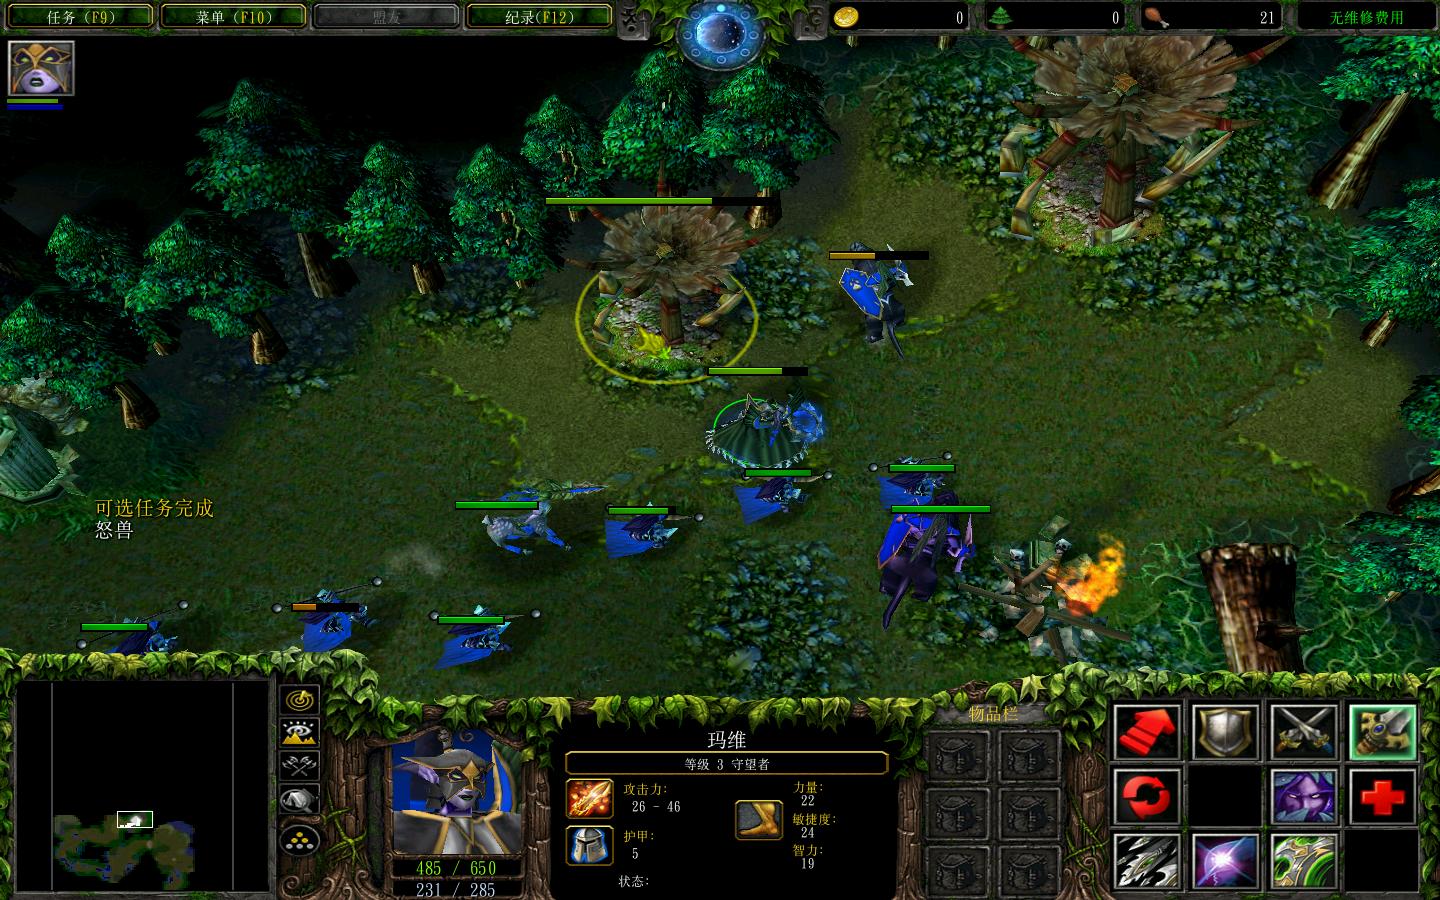 ħ3Warcraft III The Frozen Throne1.24EСϮ v4.9